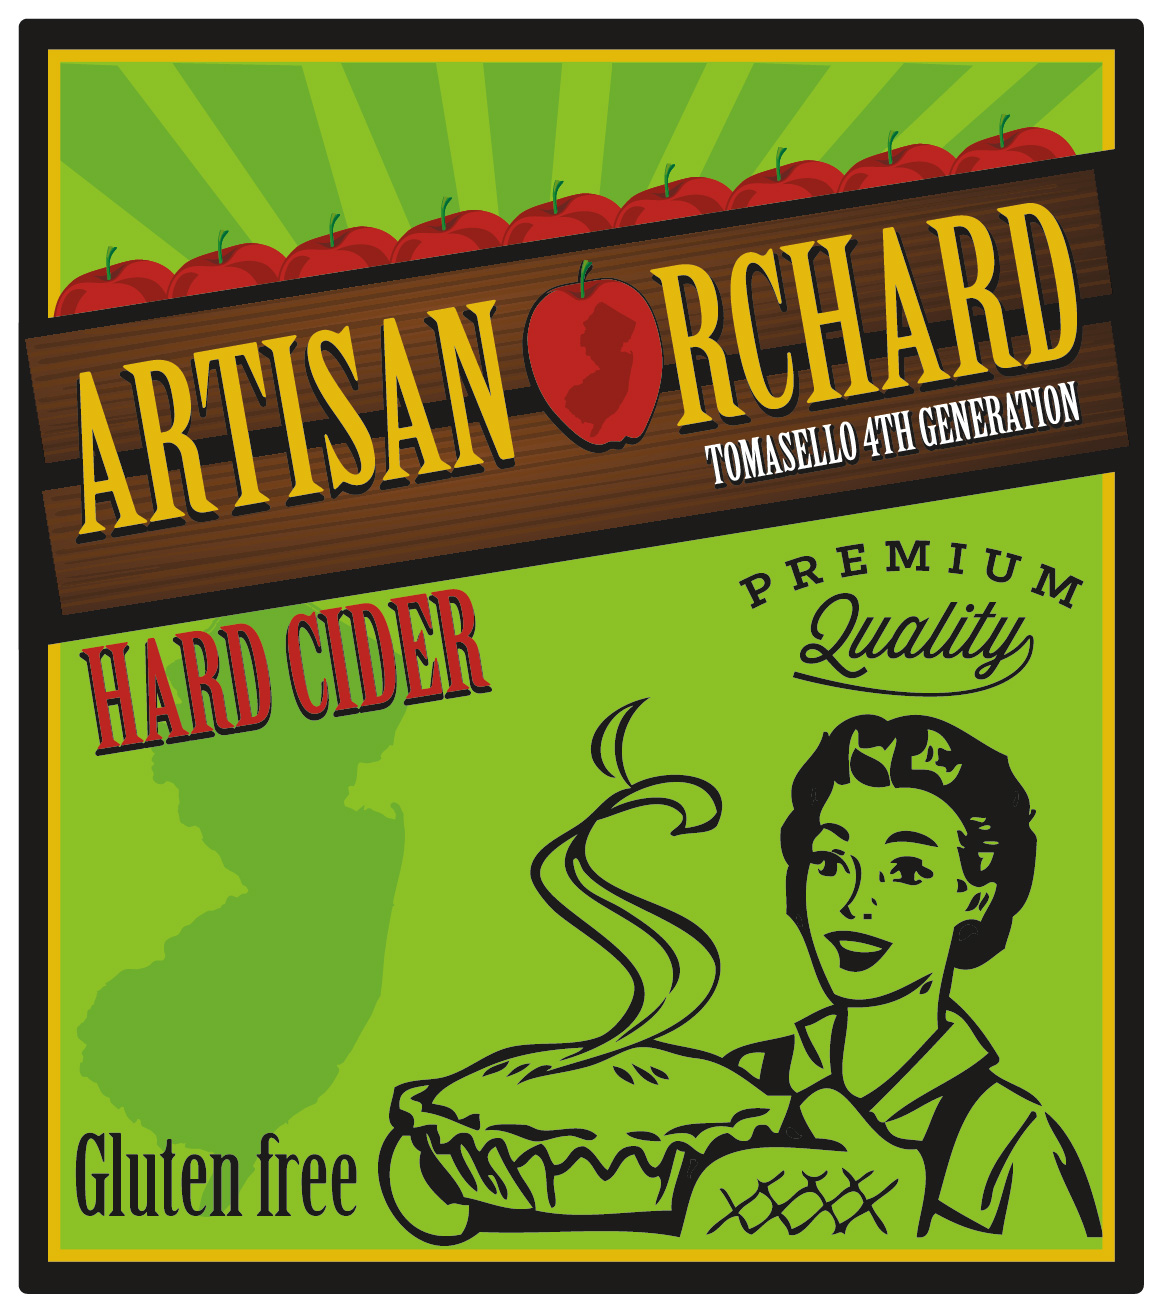 Product Image for Artisan Orchard Hard Cider